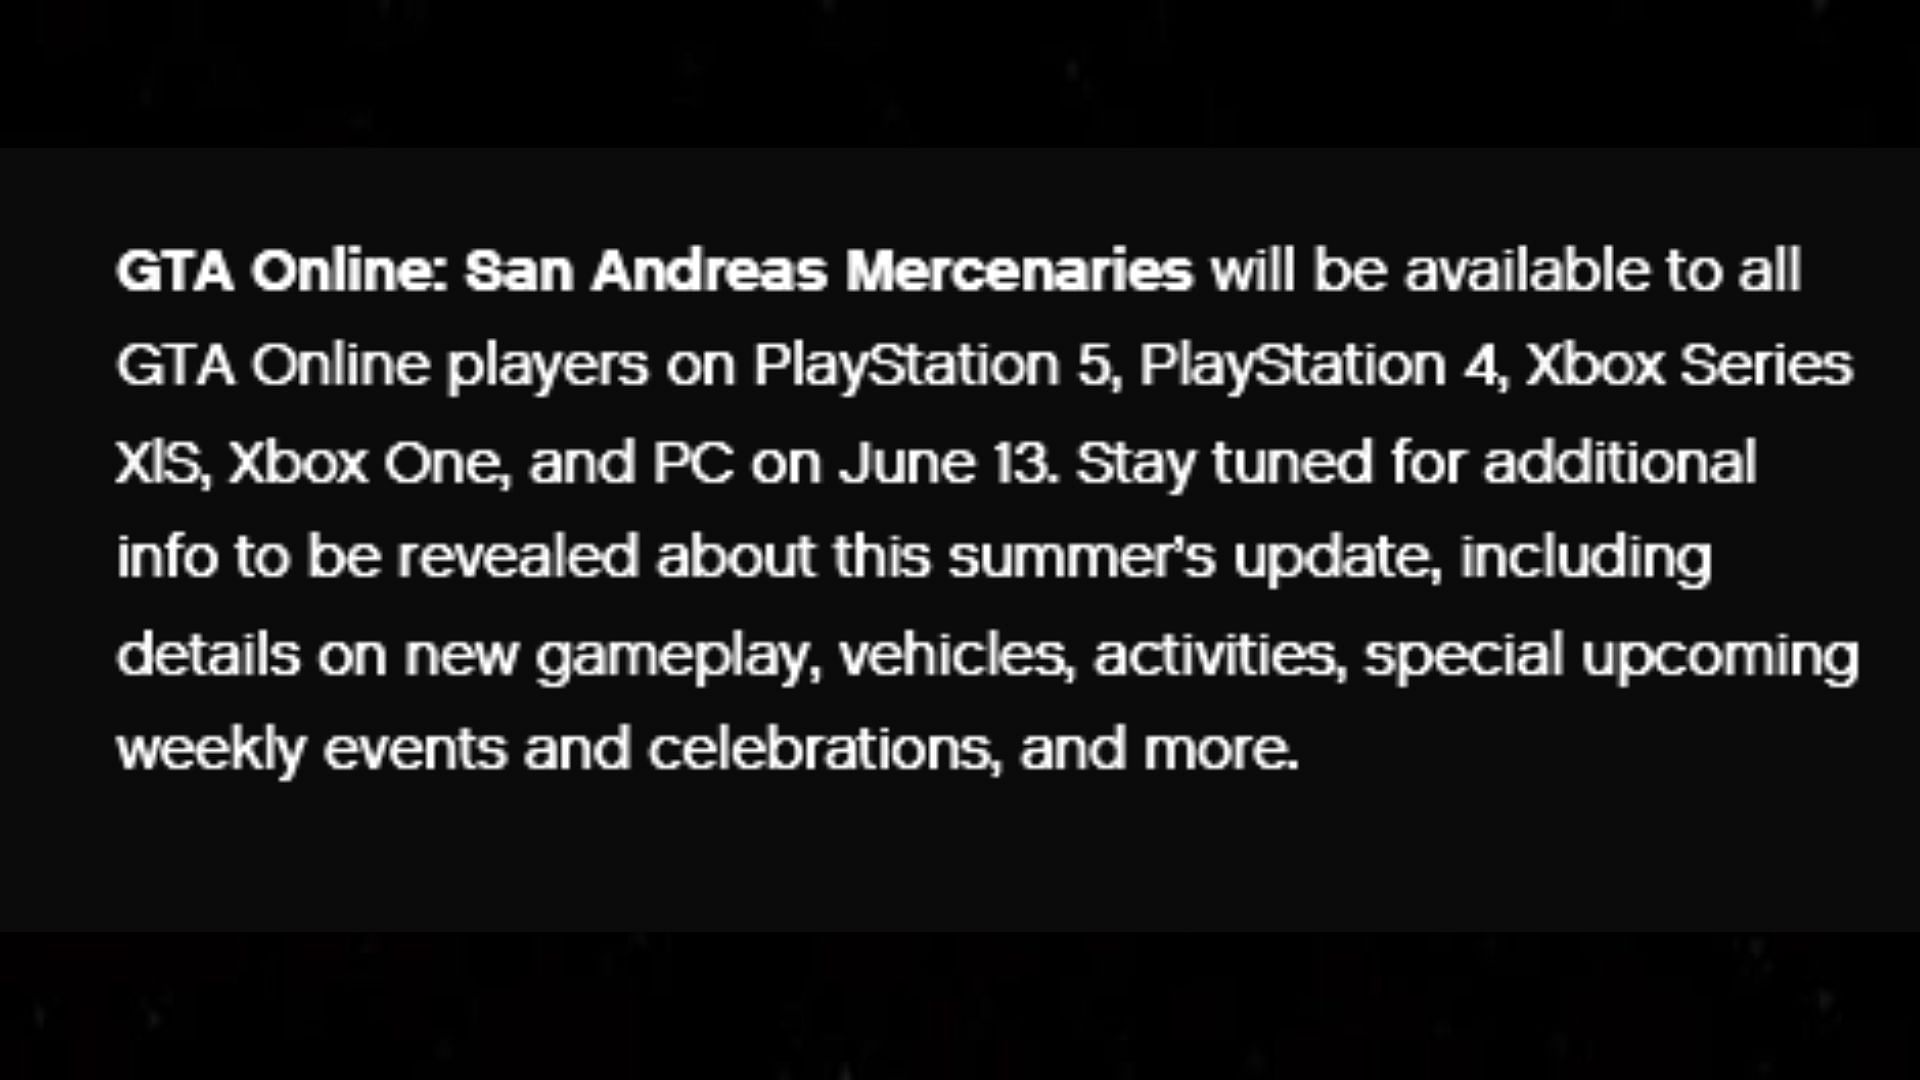 Fans have been asked to stay tuned for upcoming celebrations (Image via Rockstar Games)